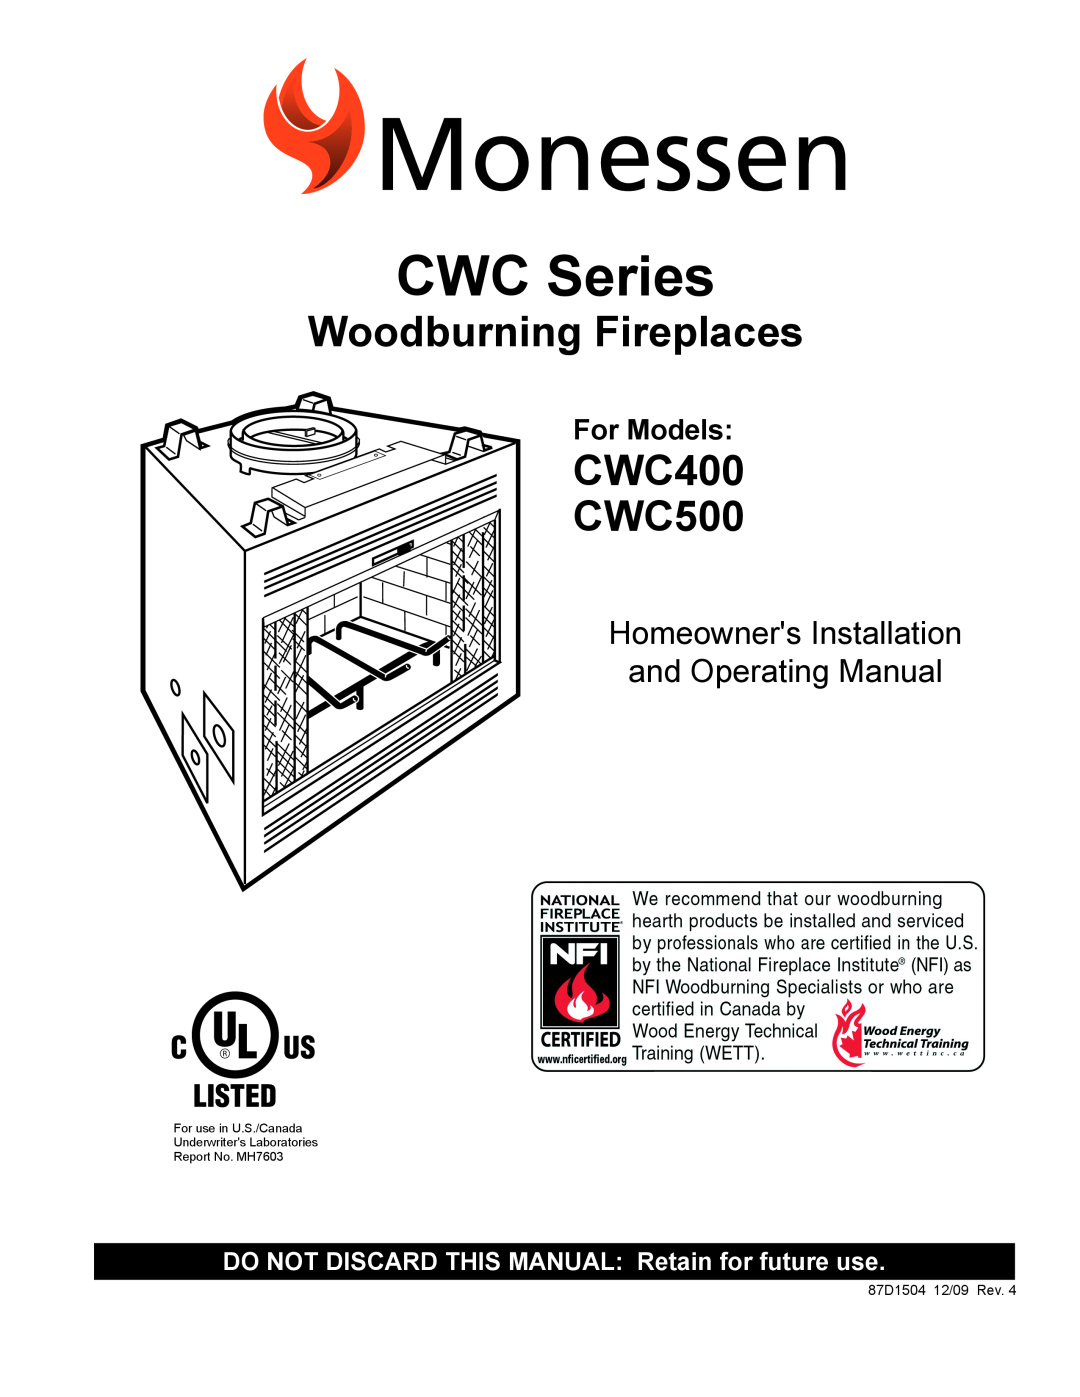 Monessen Hearth manual Woodburning Fireplaces, CWC400 CWC500, CWC Series, Homeowners Installation and Operating Manual 